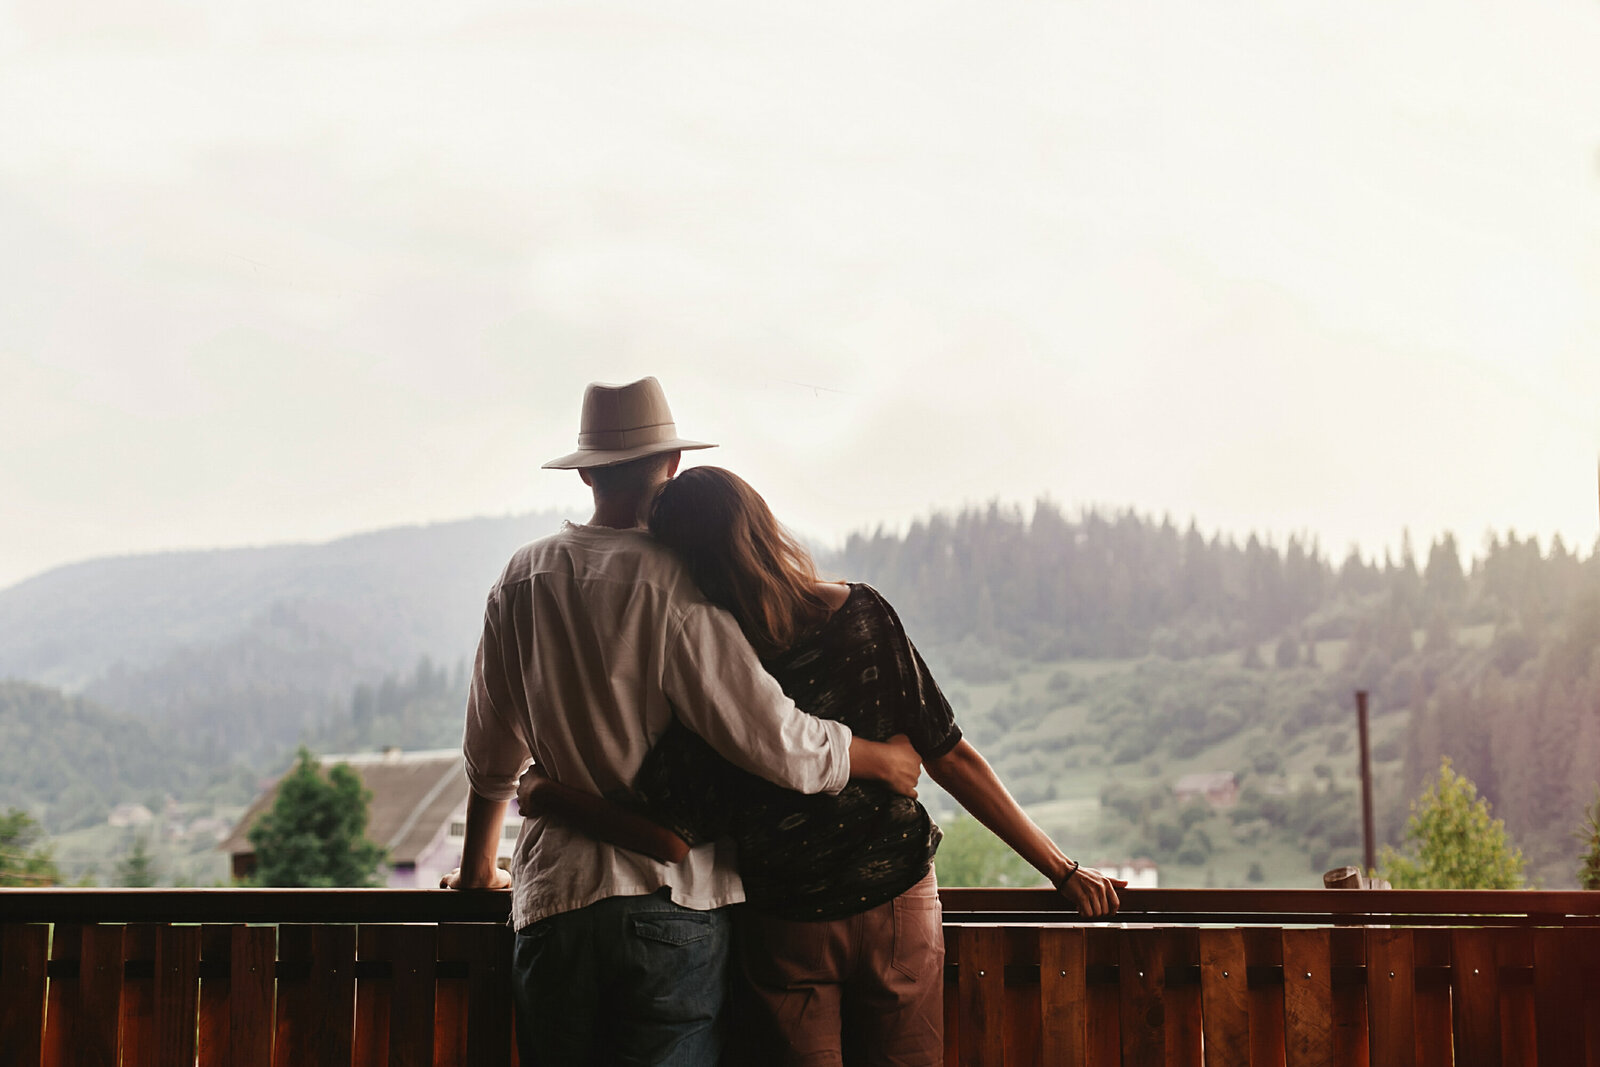 hipster-couple-hugging-on-porch-of-wooden-house-lo-2AJWSYH